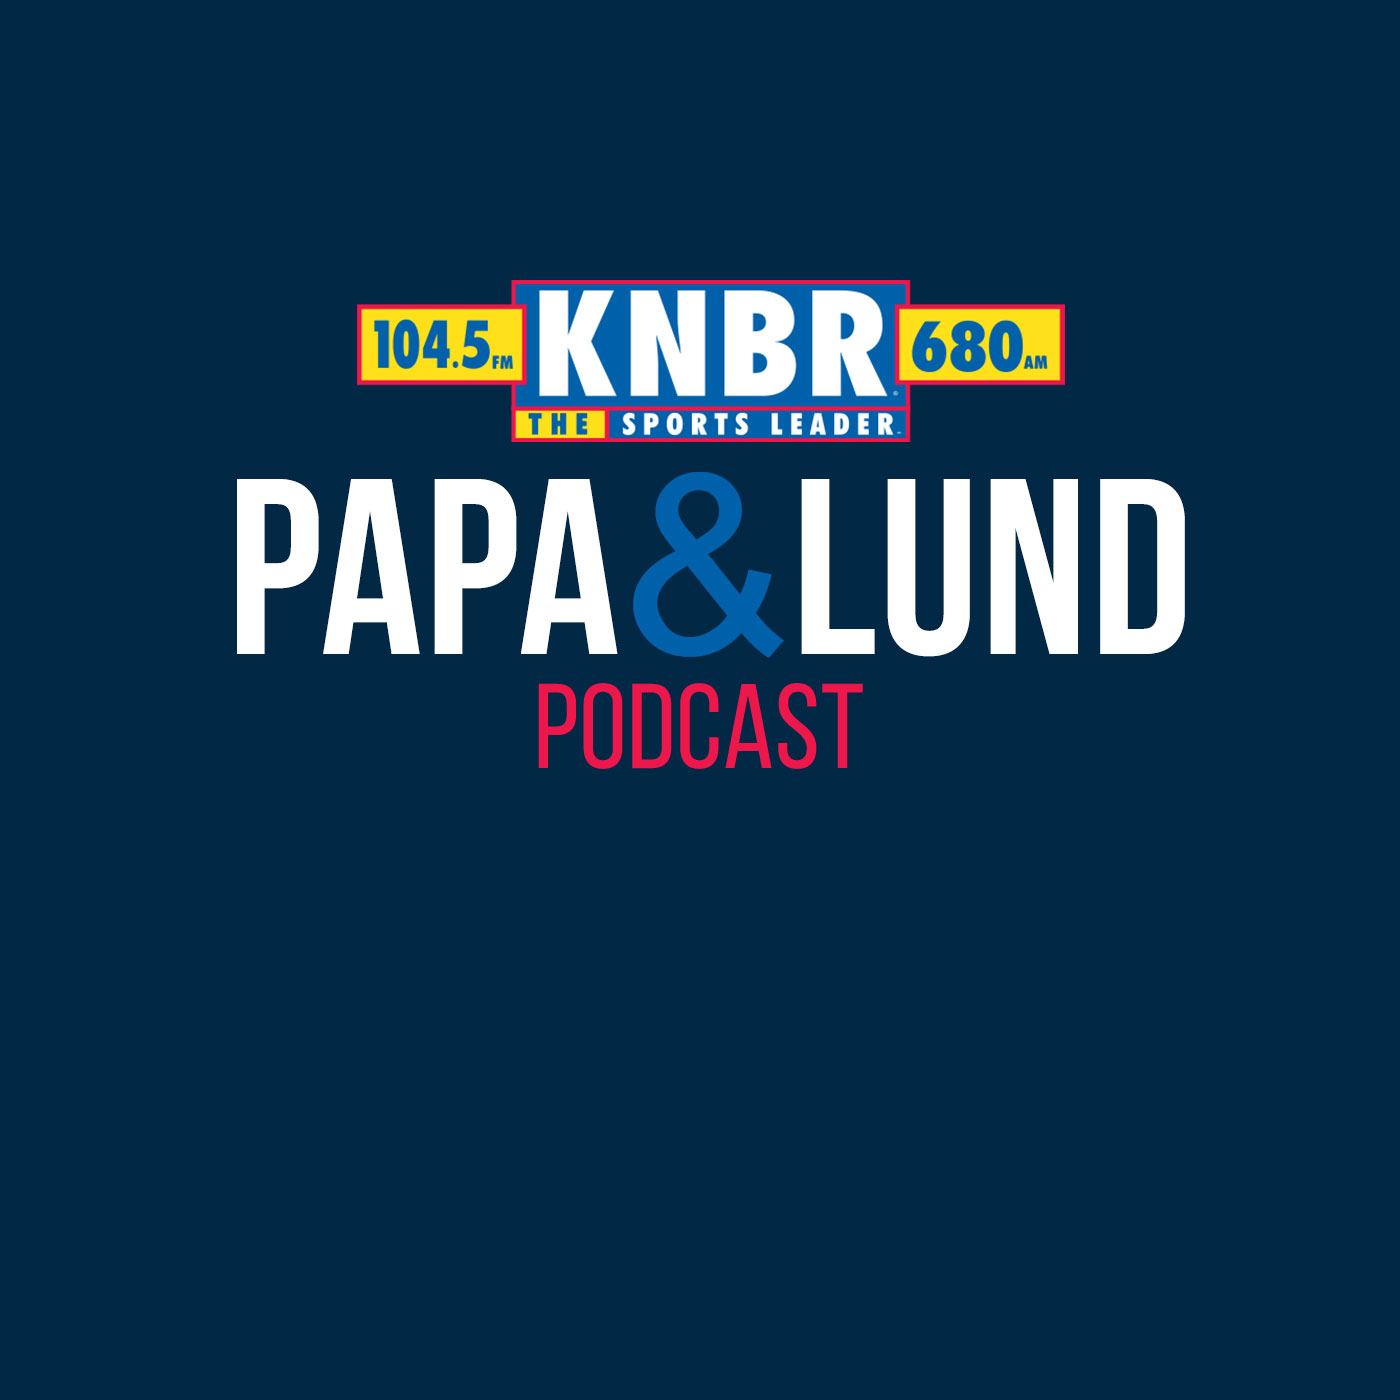 5-10 Andrew Baggarly joins Papa & Lund to discuss the Giants struggling offense and if the Giants can withstand the Injury bug